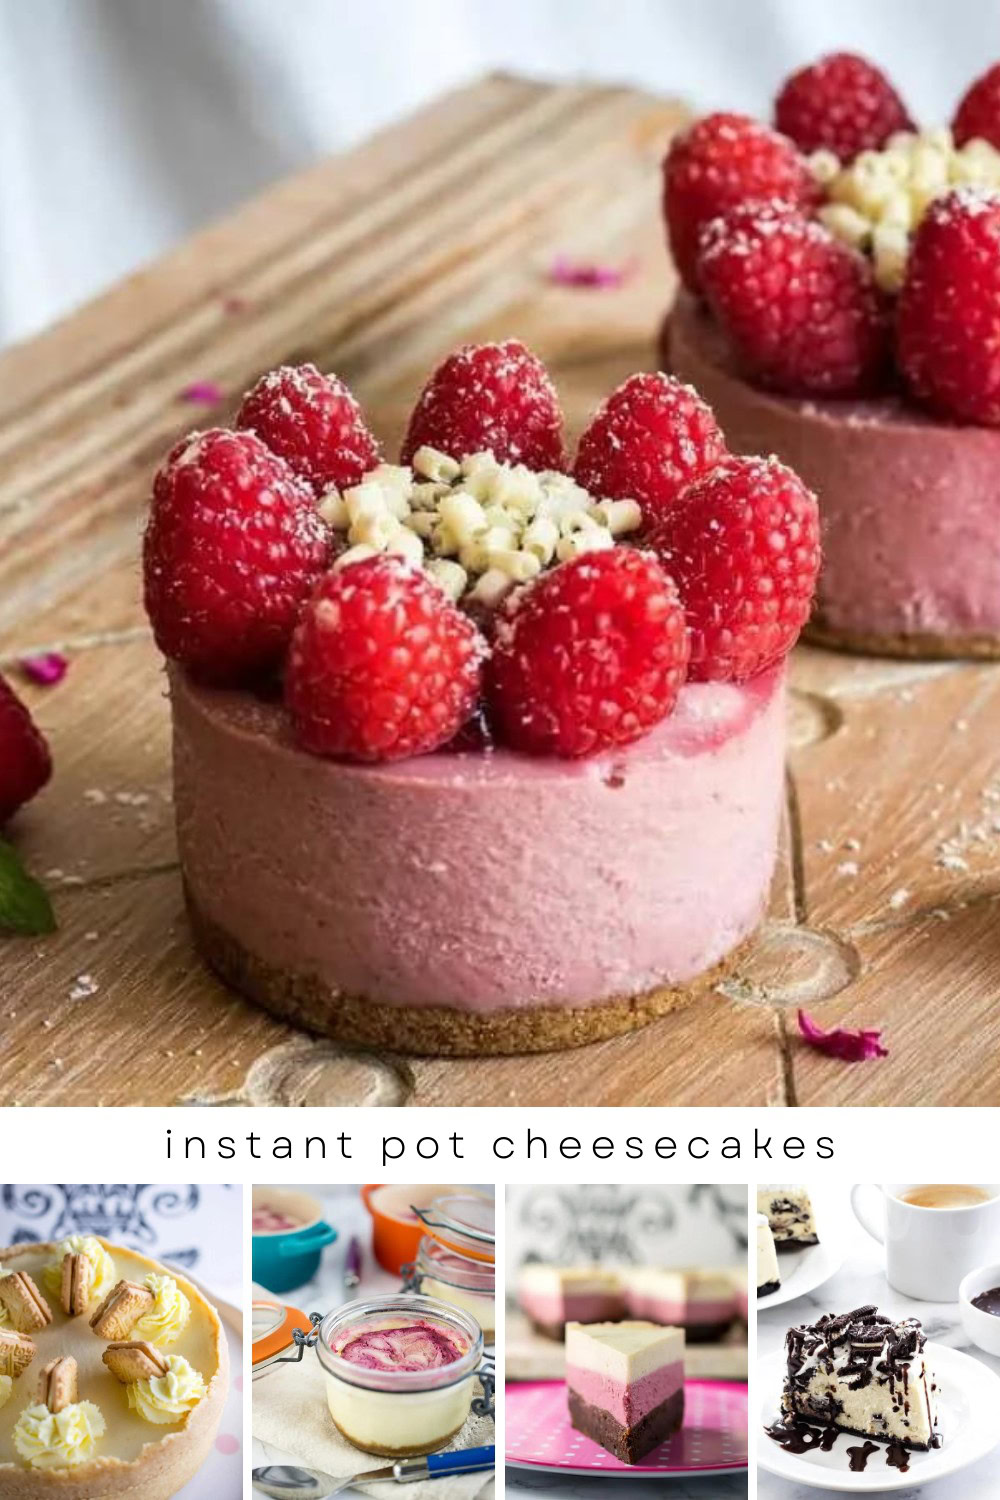 Rich, creamy, and decadent Instant Pot Cheesecake – so easy to make, it's the perfect reason to buy an Instapot! Treat yourself to this mouthwatering dessert with minimal effort. 🧀🍰 #EasyDesserts #InstantPotMagic